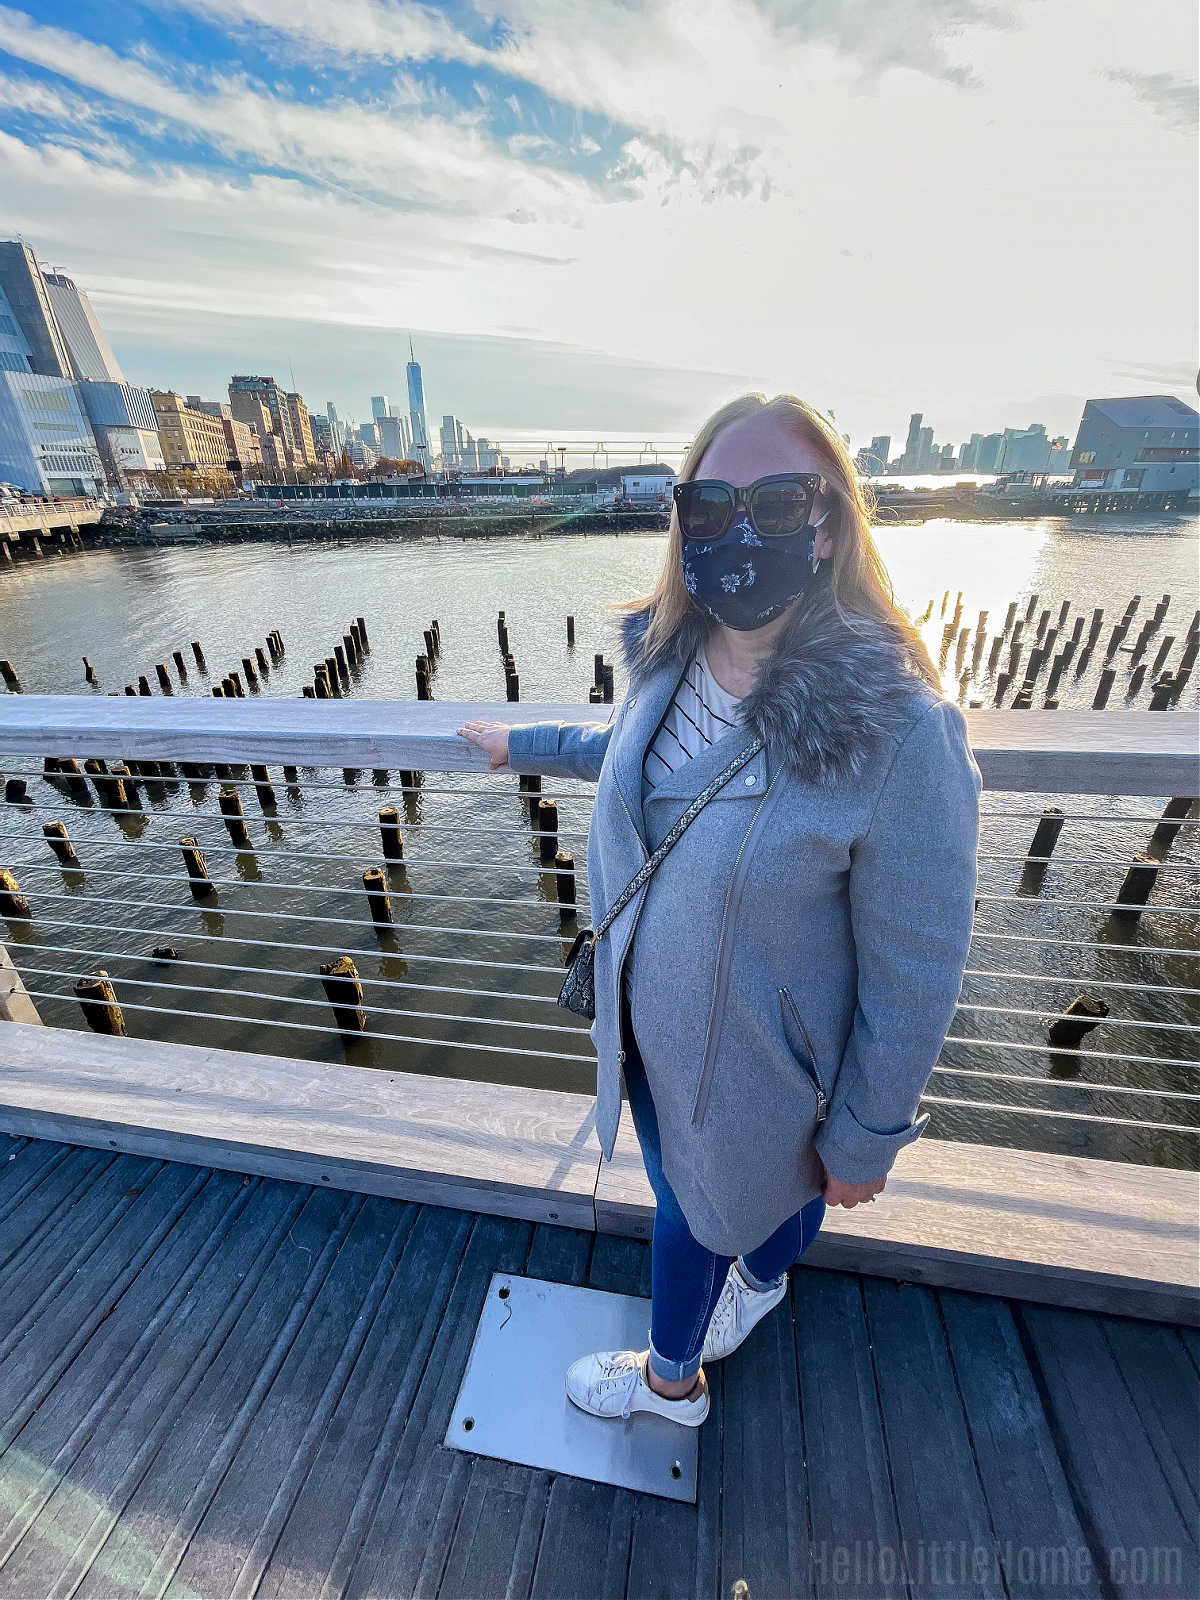 The author standing on a deck over the Hudson in NYC.